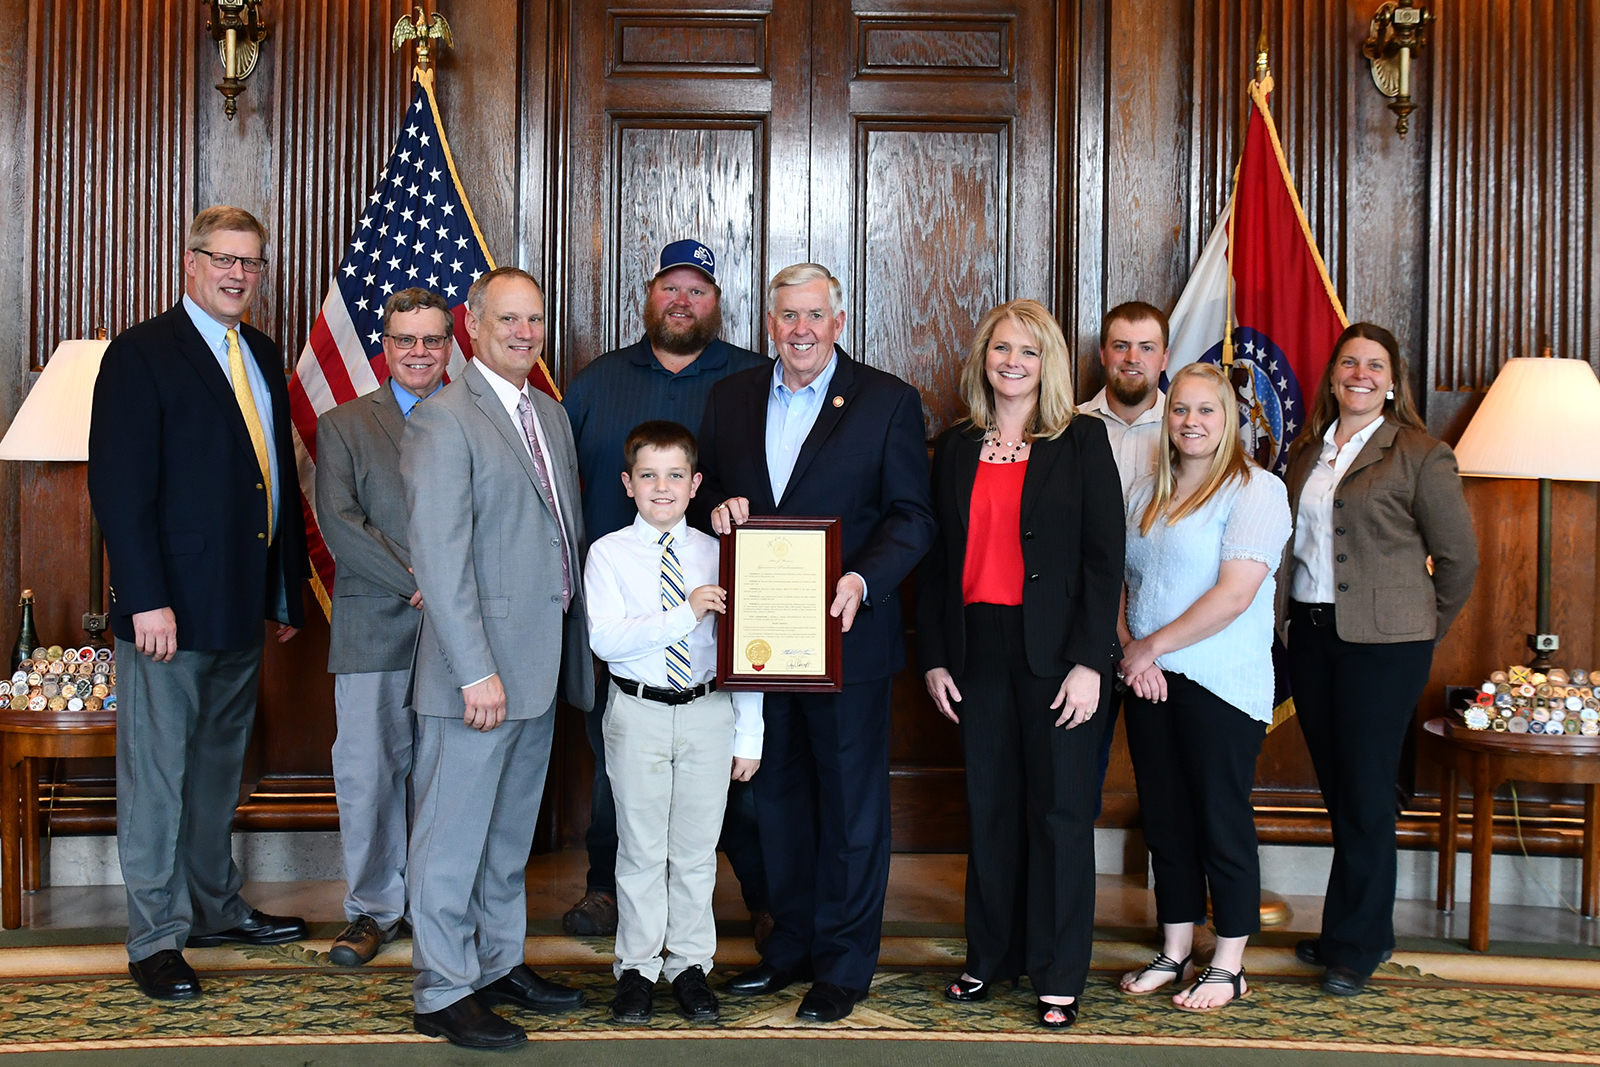 Open Dairy farmers, dairy industry leaders and others joined Missouri Gov. Mike Parson during his proclamation of June as Dairy Month.